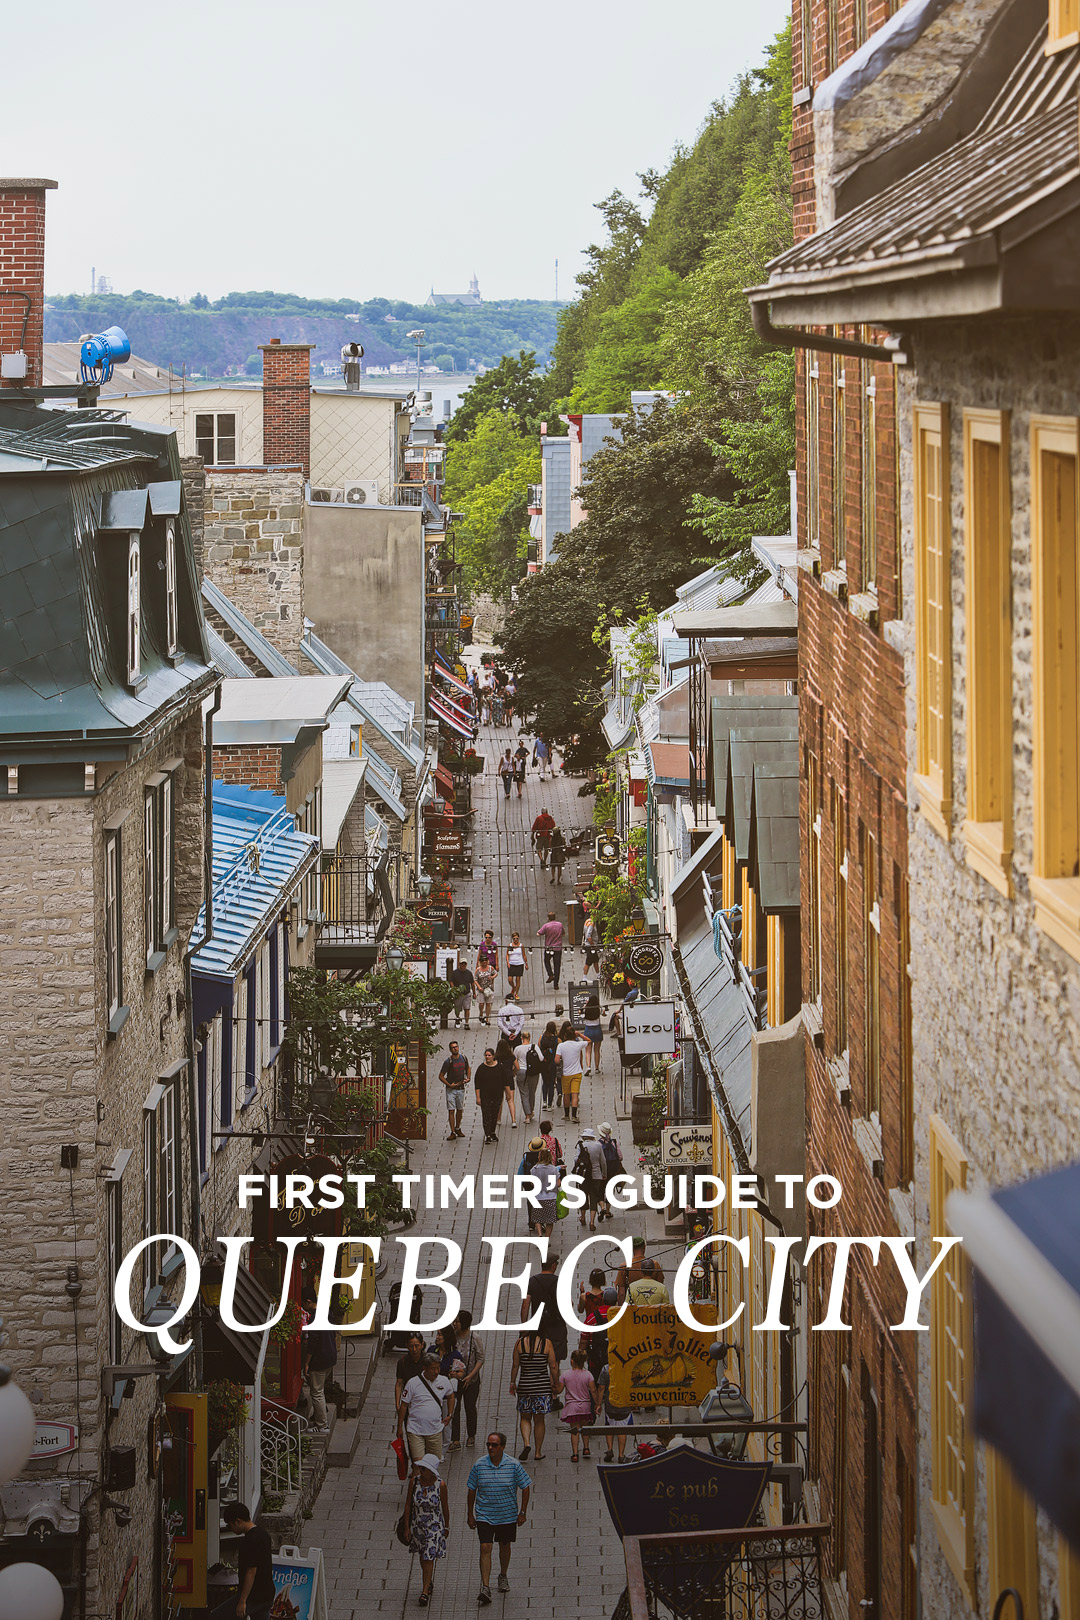 Heading to quebec city? Save this pin and click to check out my blog post listing the best things to do in quebec city. It includes the best quebec city sightseeing spots, great views of the city, places to stay in quebec city, and where you visit in downtown quebec city. Use this guide to help you plan the best trip and catch all the quebec city must sees. // Local Adventurer #quebec #quebeccity #canada #travel